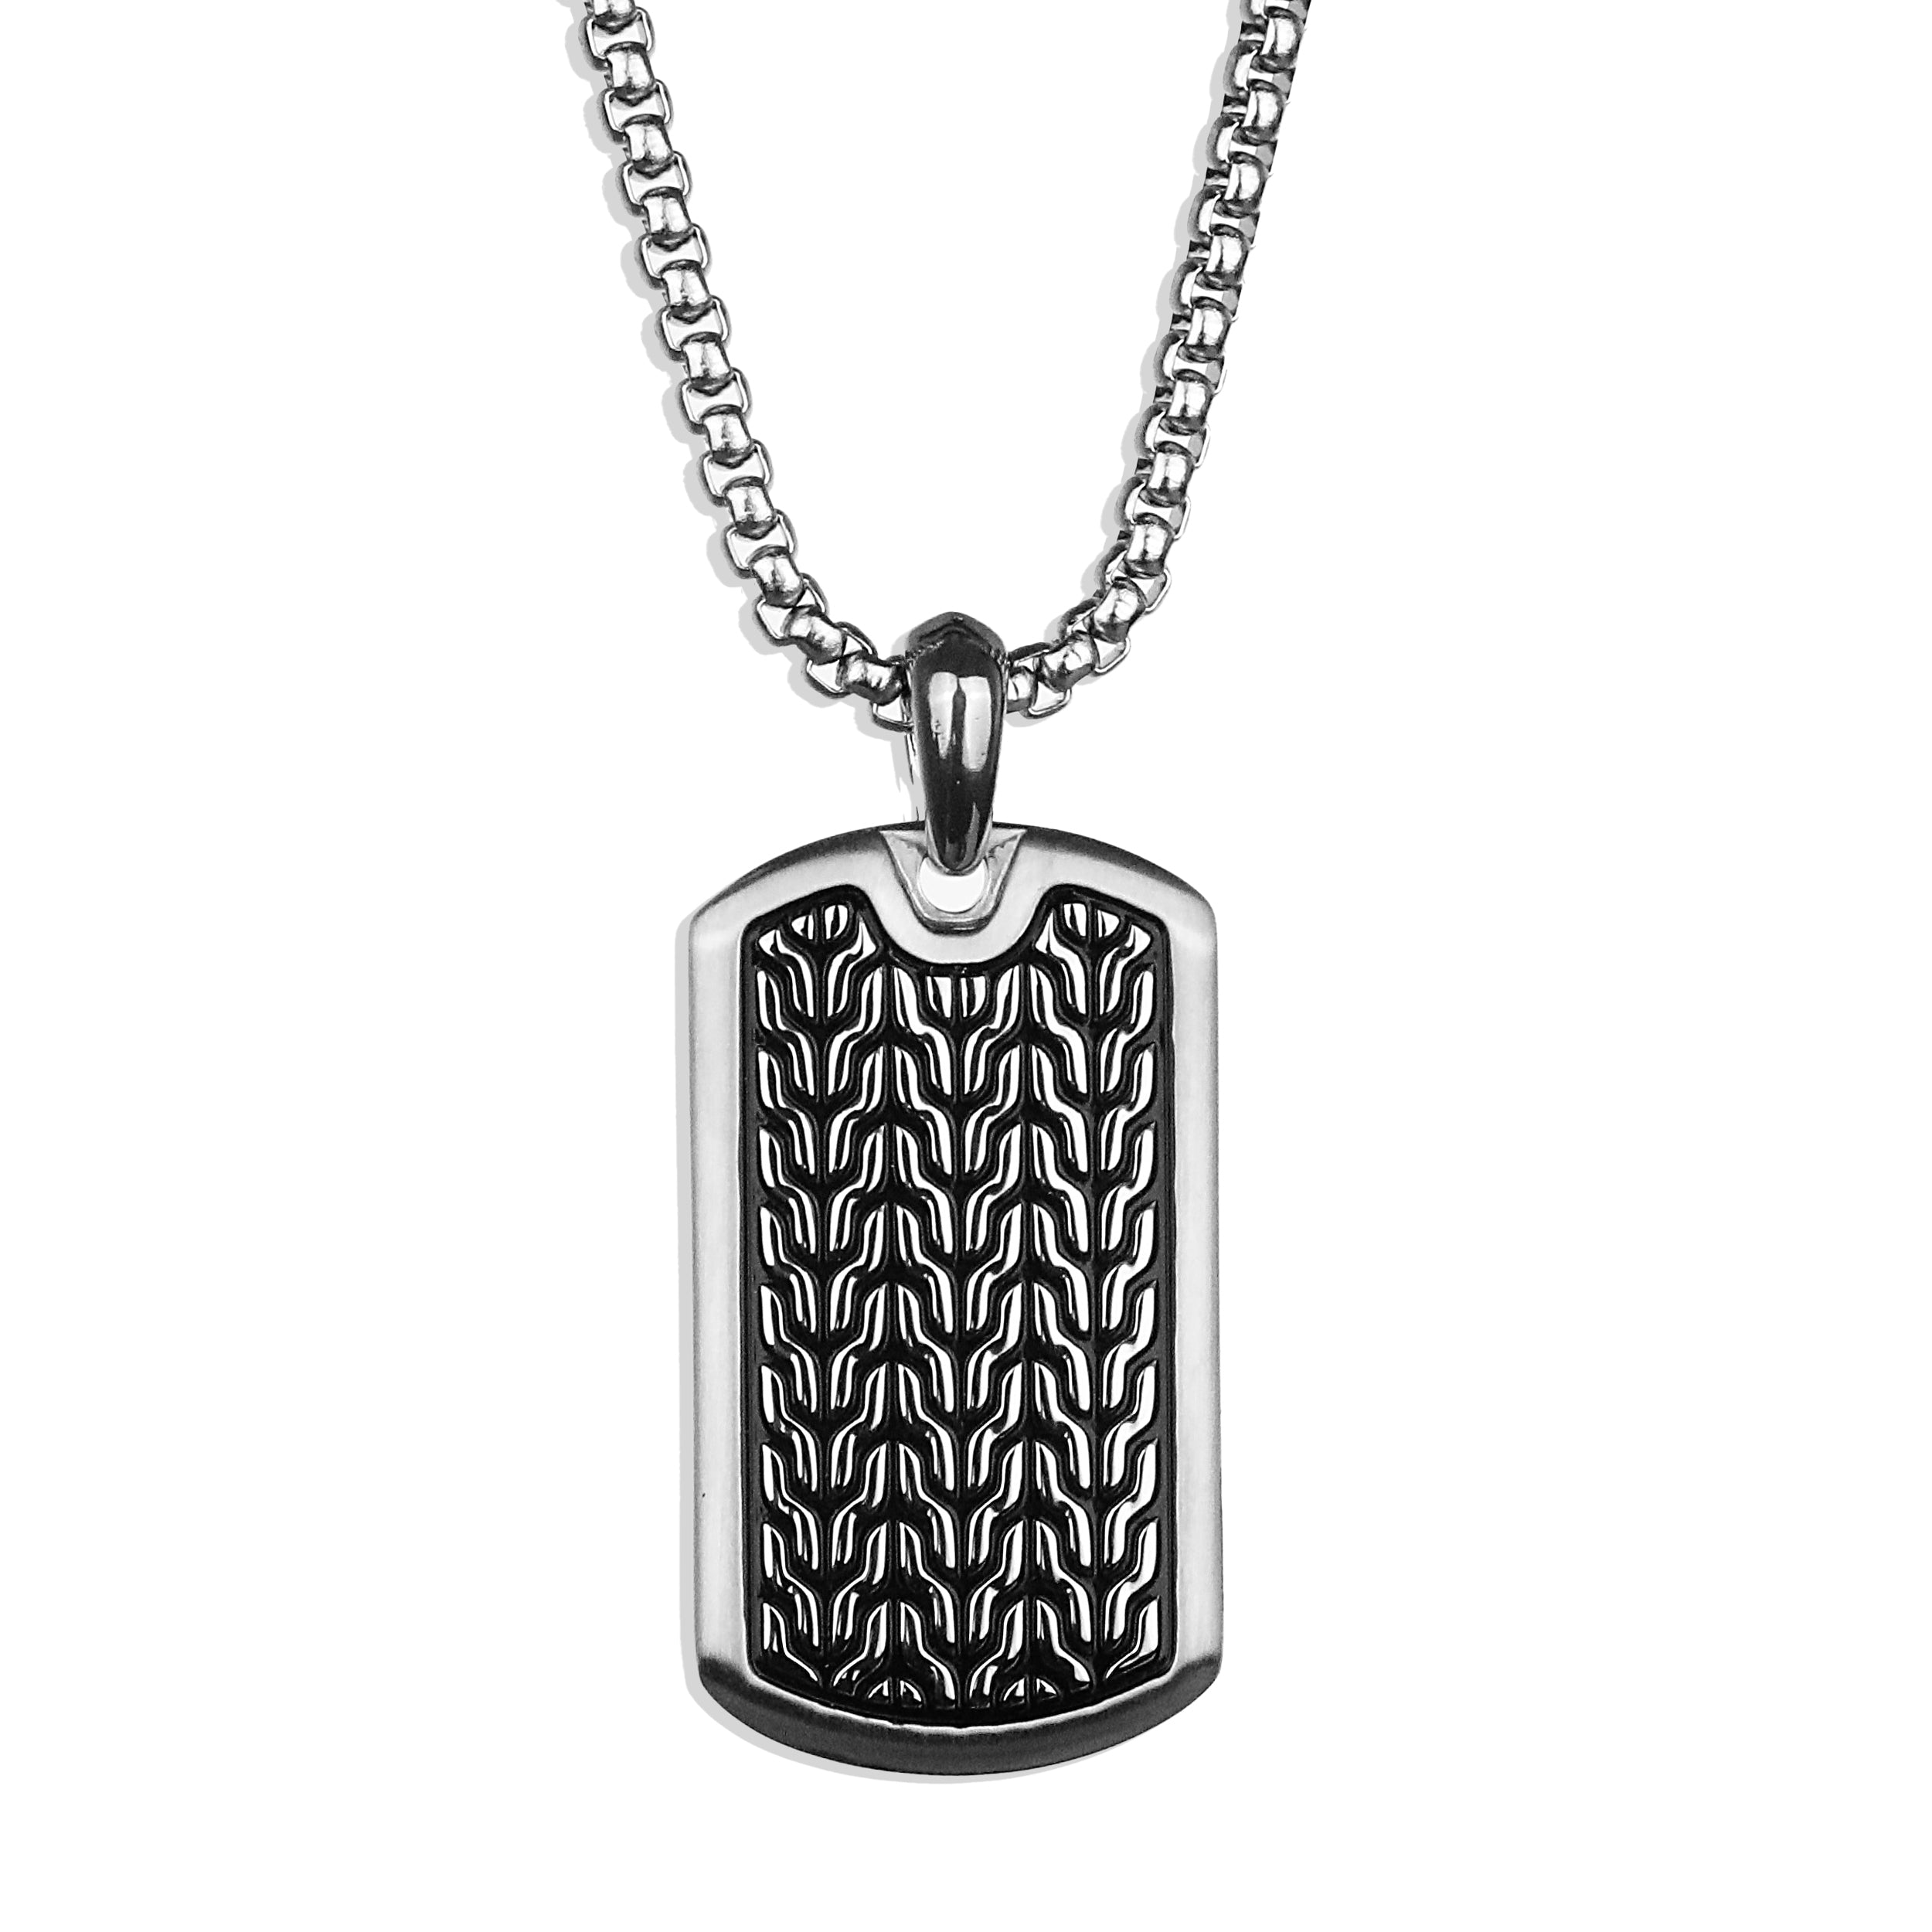 Wheat Tag Necklace - Silver x Black